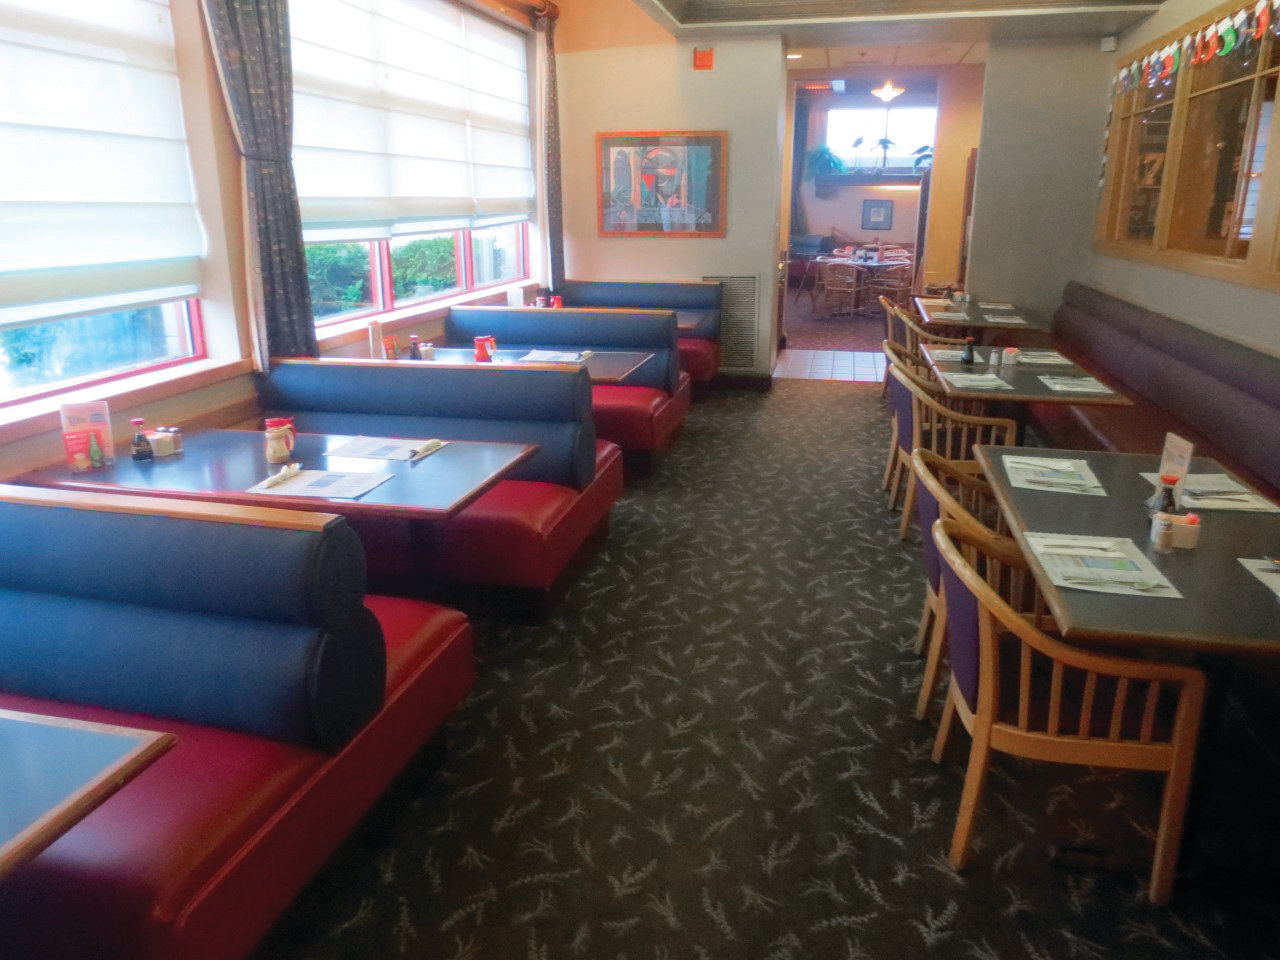 Come dine in this immaculate and long-standing restaurant on West Shore Road and enjoy a diverse menu of authentic Chinese food ~ perfect for those busy autumn nights when you need dinner on the go!